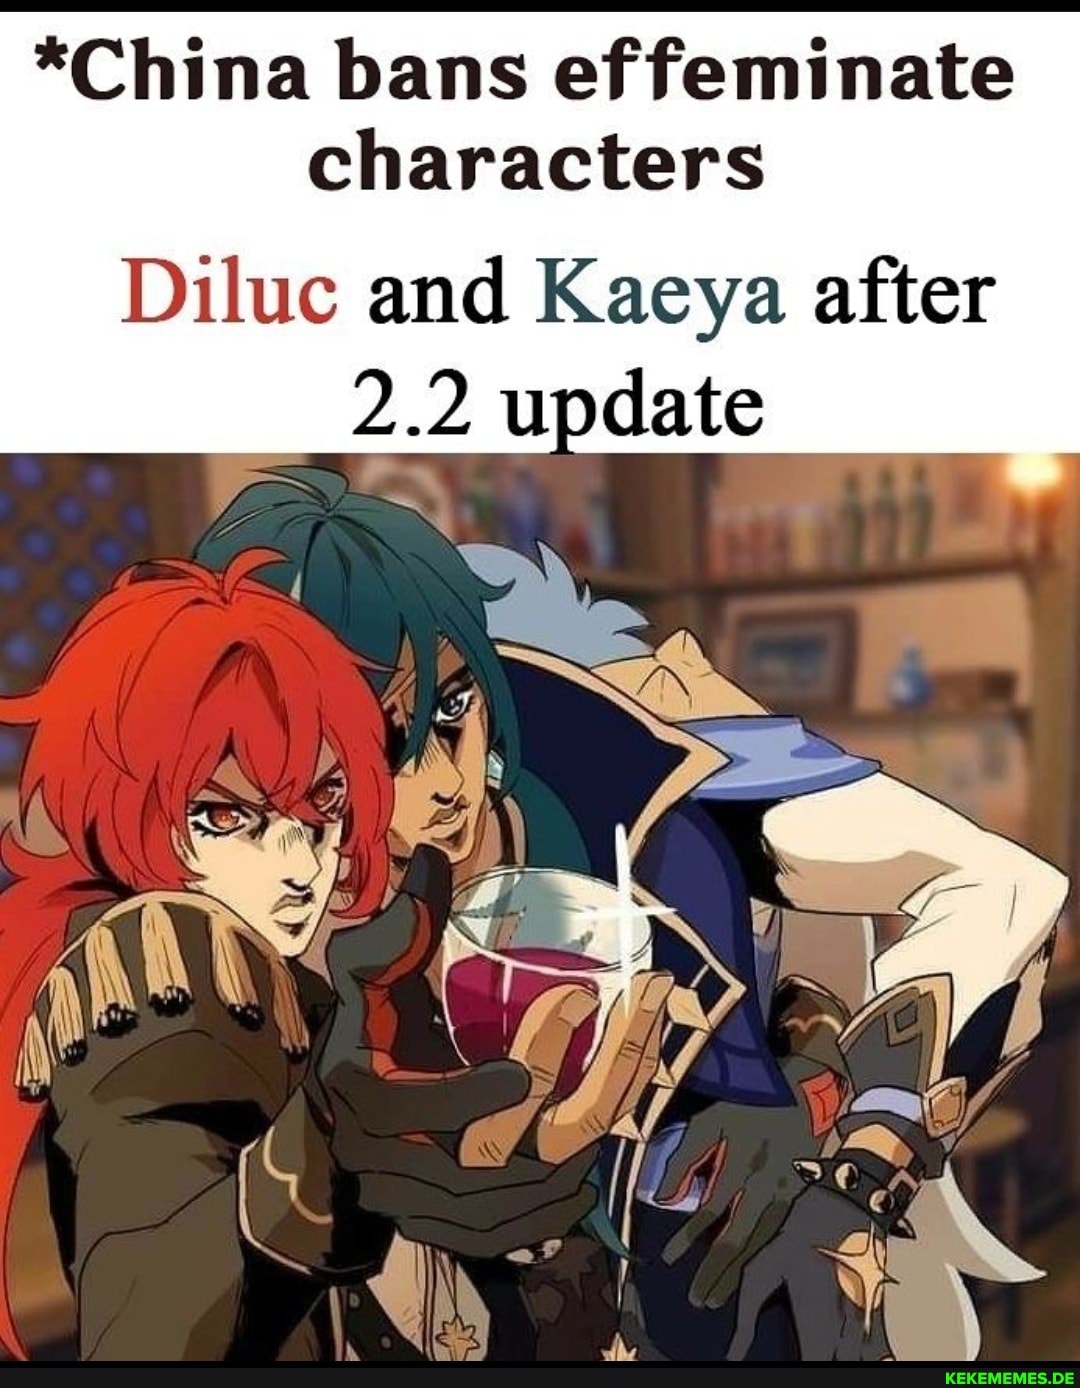 *China bans effeminate characters Diluc and Kaeya after 2.2 update